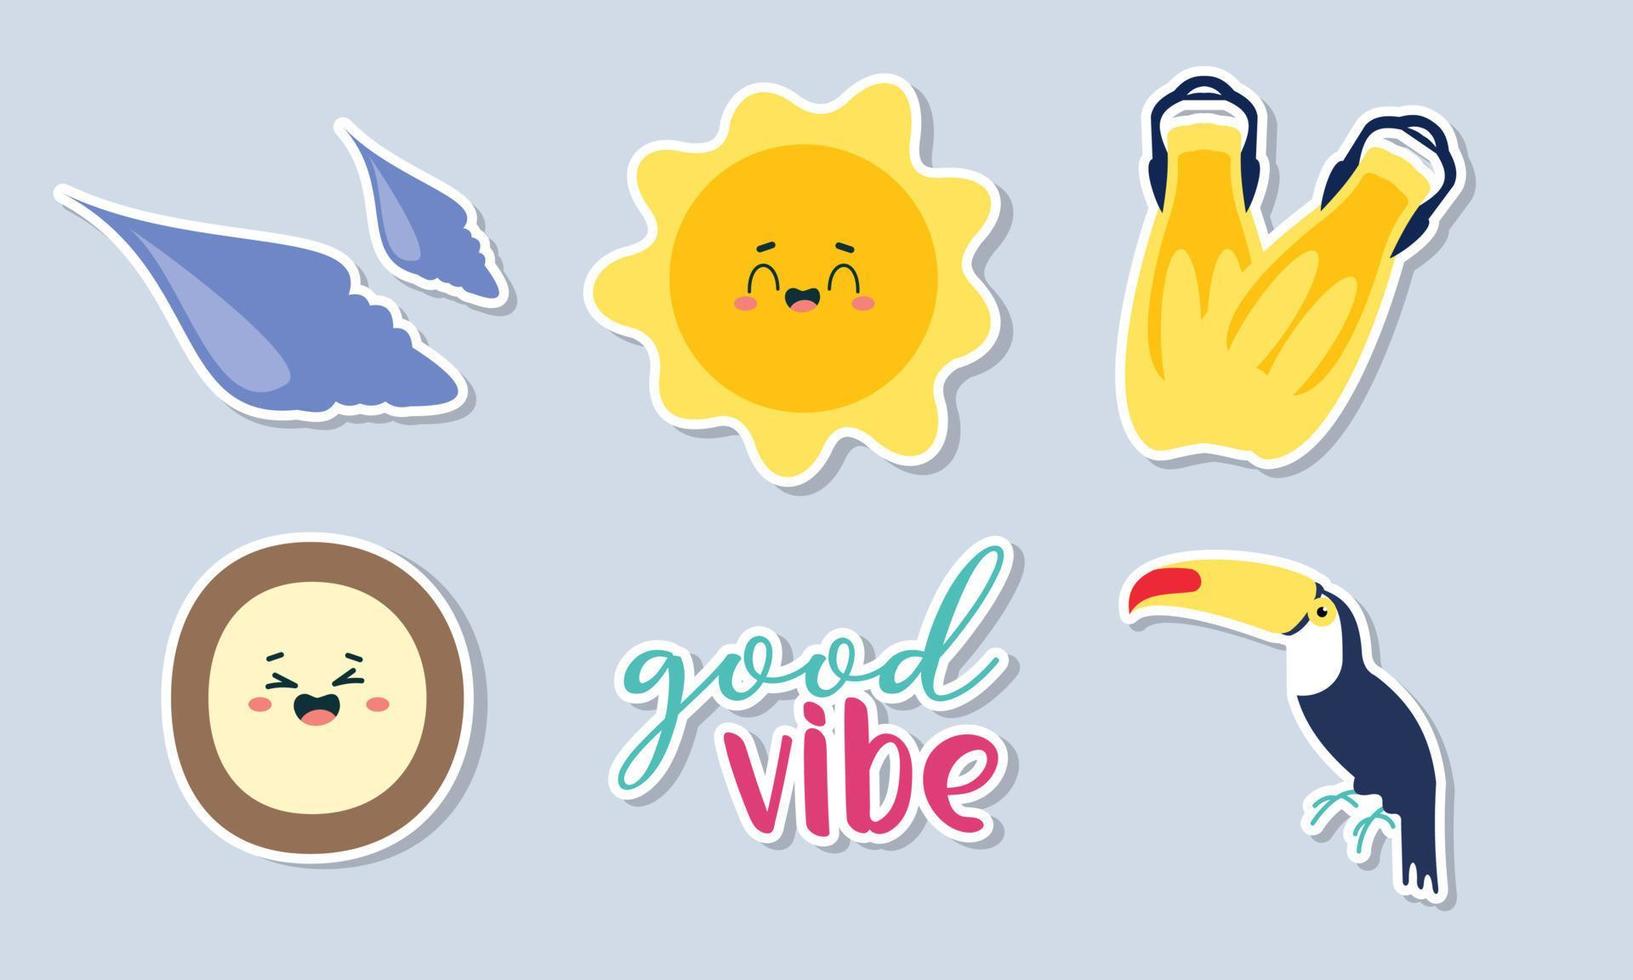 Summer stickers collection with different seasonal elements vector